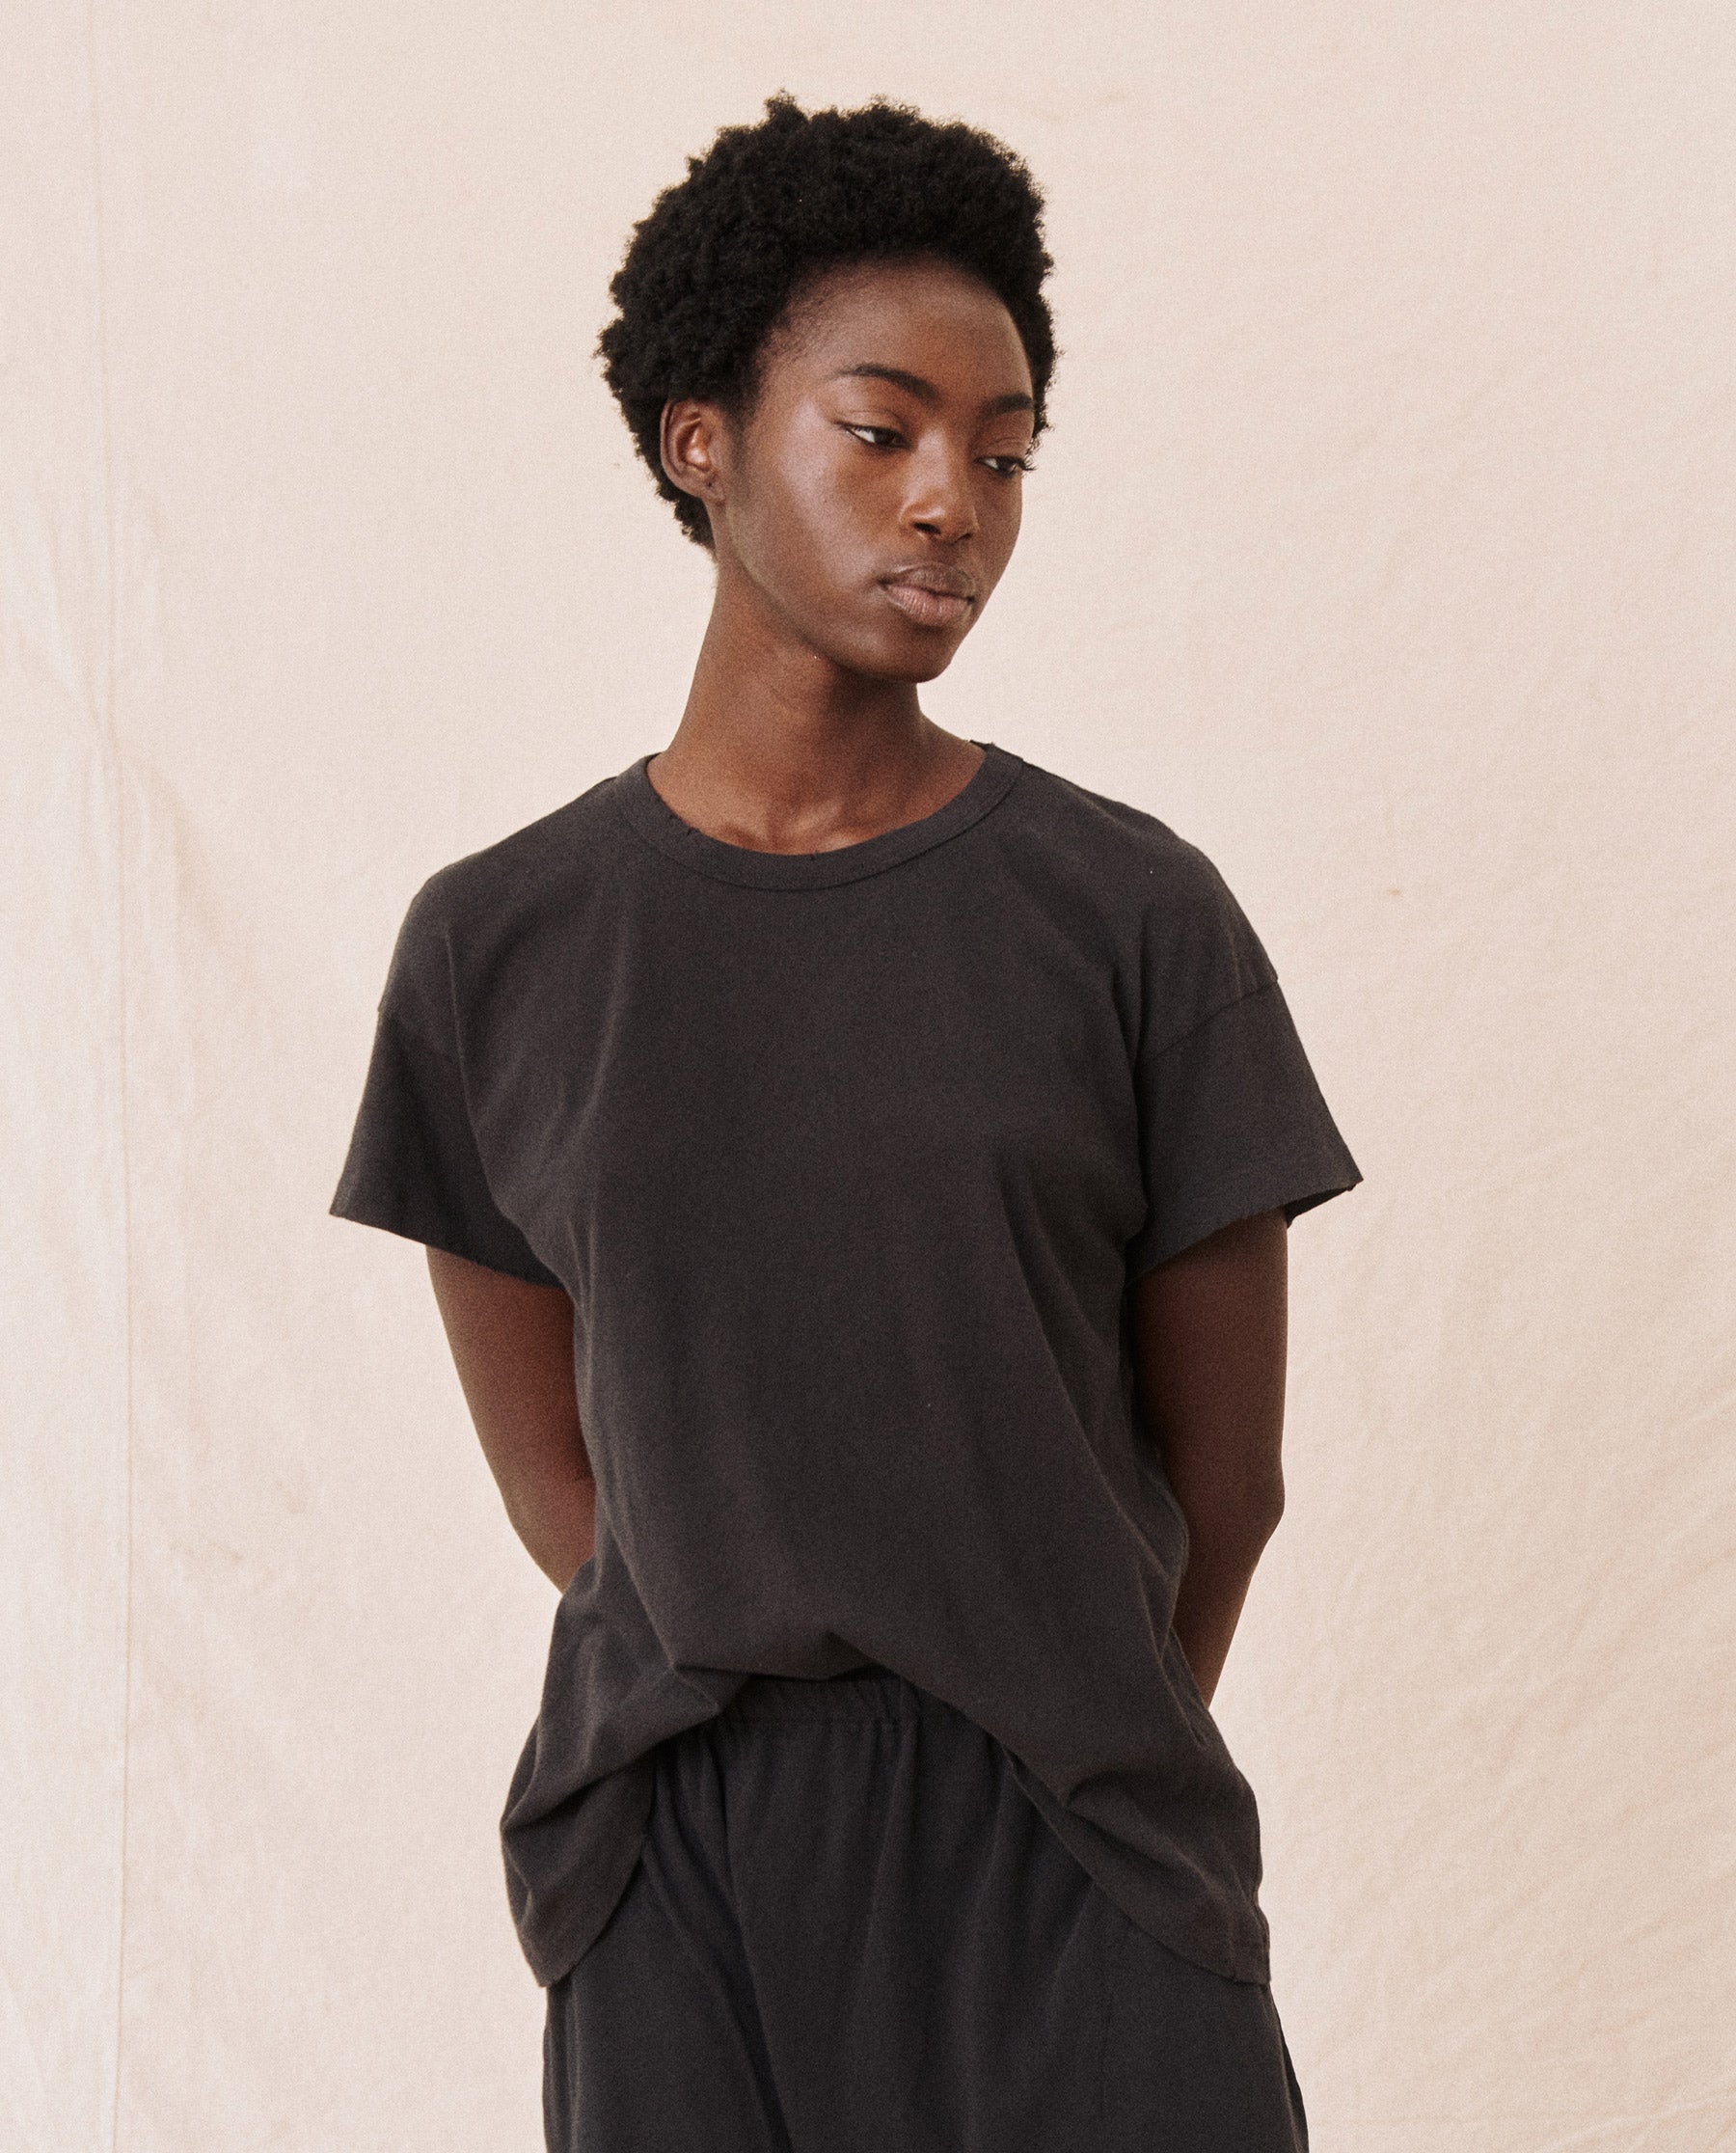 The Boxy Crew. Solid -- Almost Black TEES THE GREAT. CORE KNITS